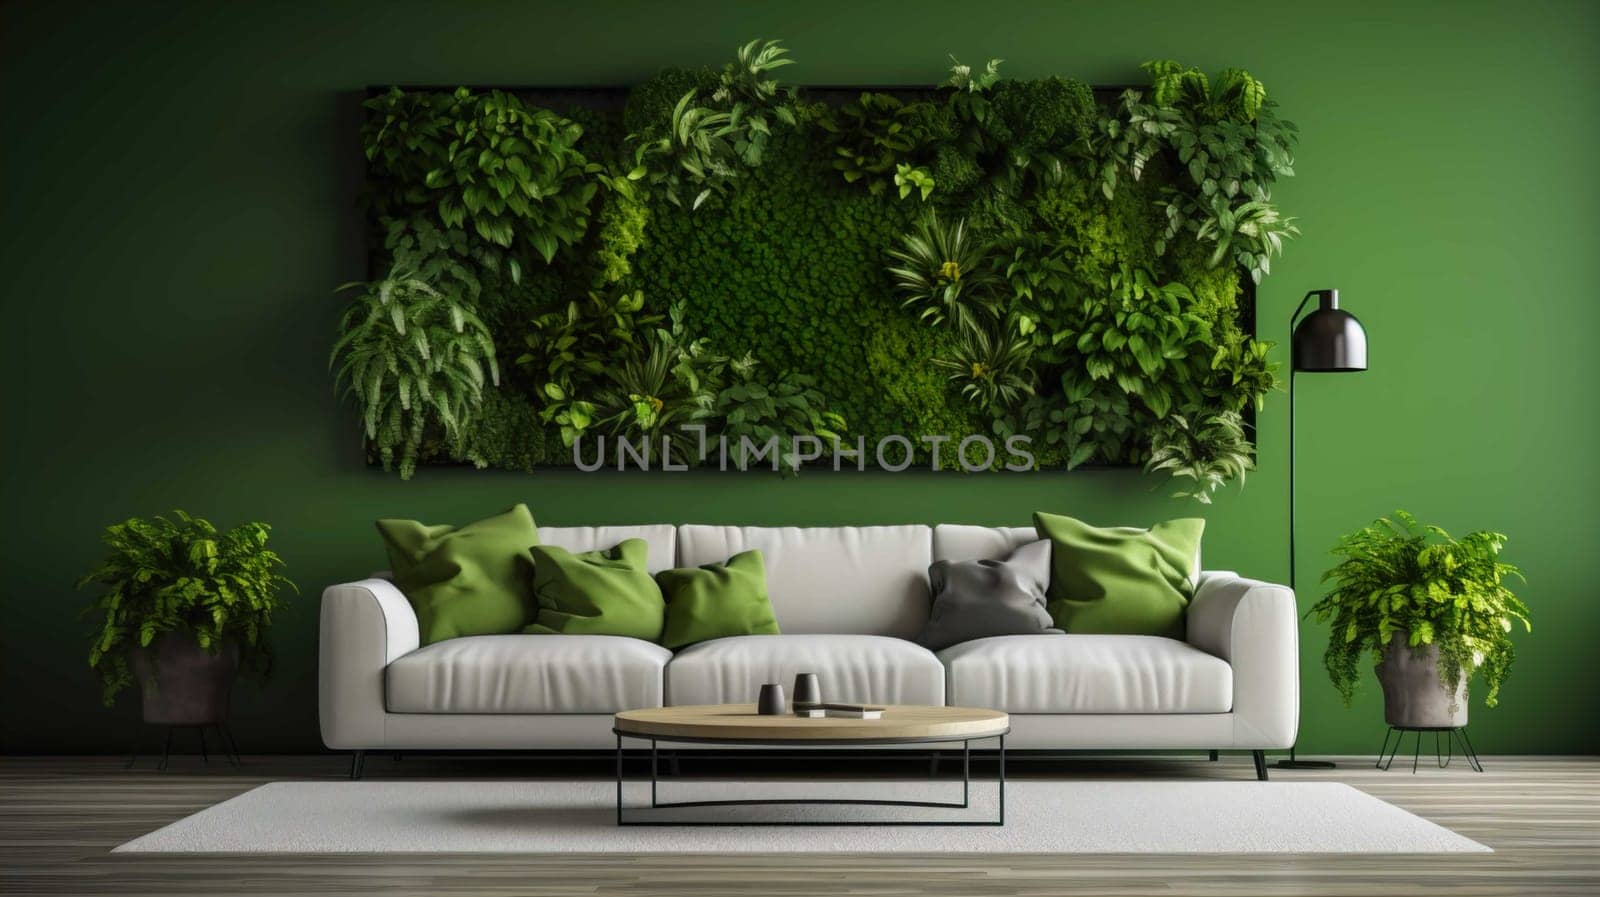   Modern Living Room Interior With Green Plants, Sofa And Green Wall Background Modern Living Room Interior With Green Plants  , Generate AI by Mrsongrphc